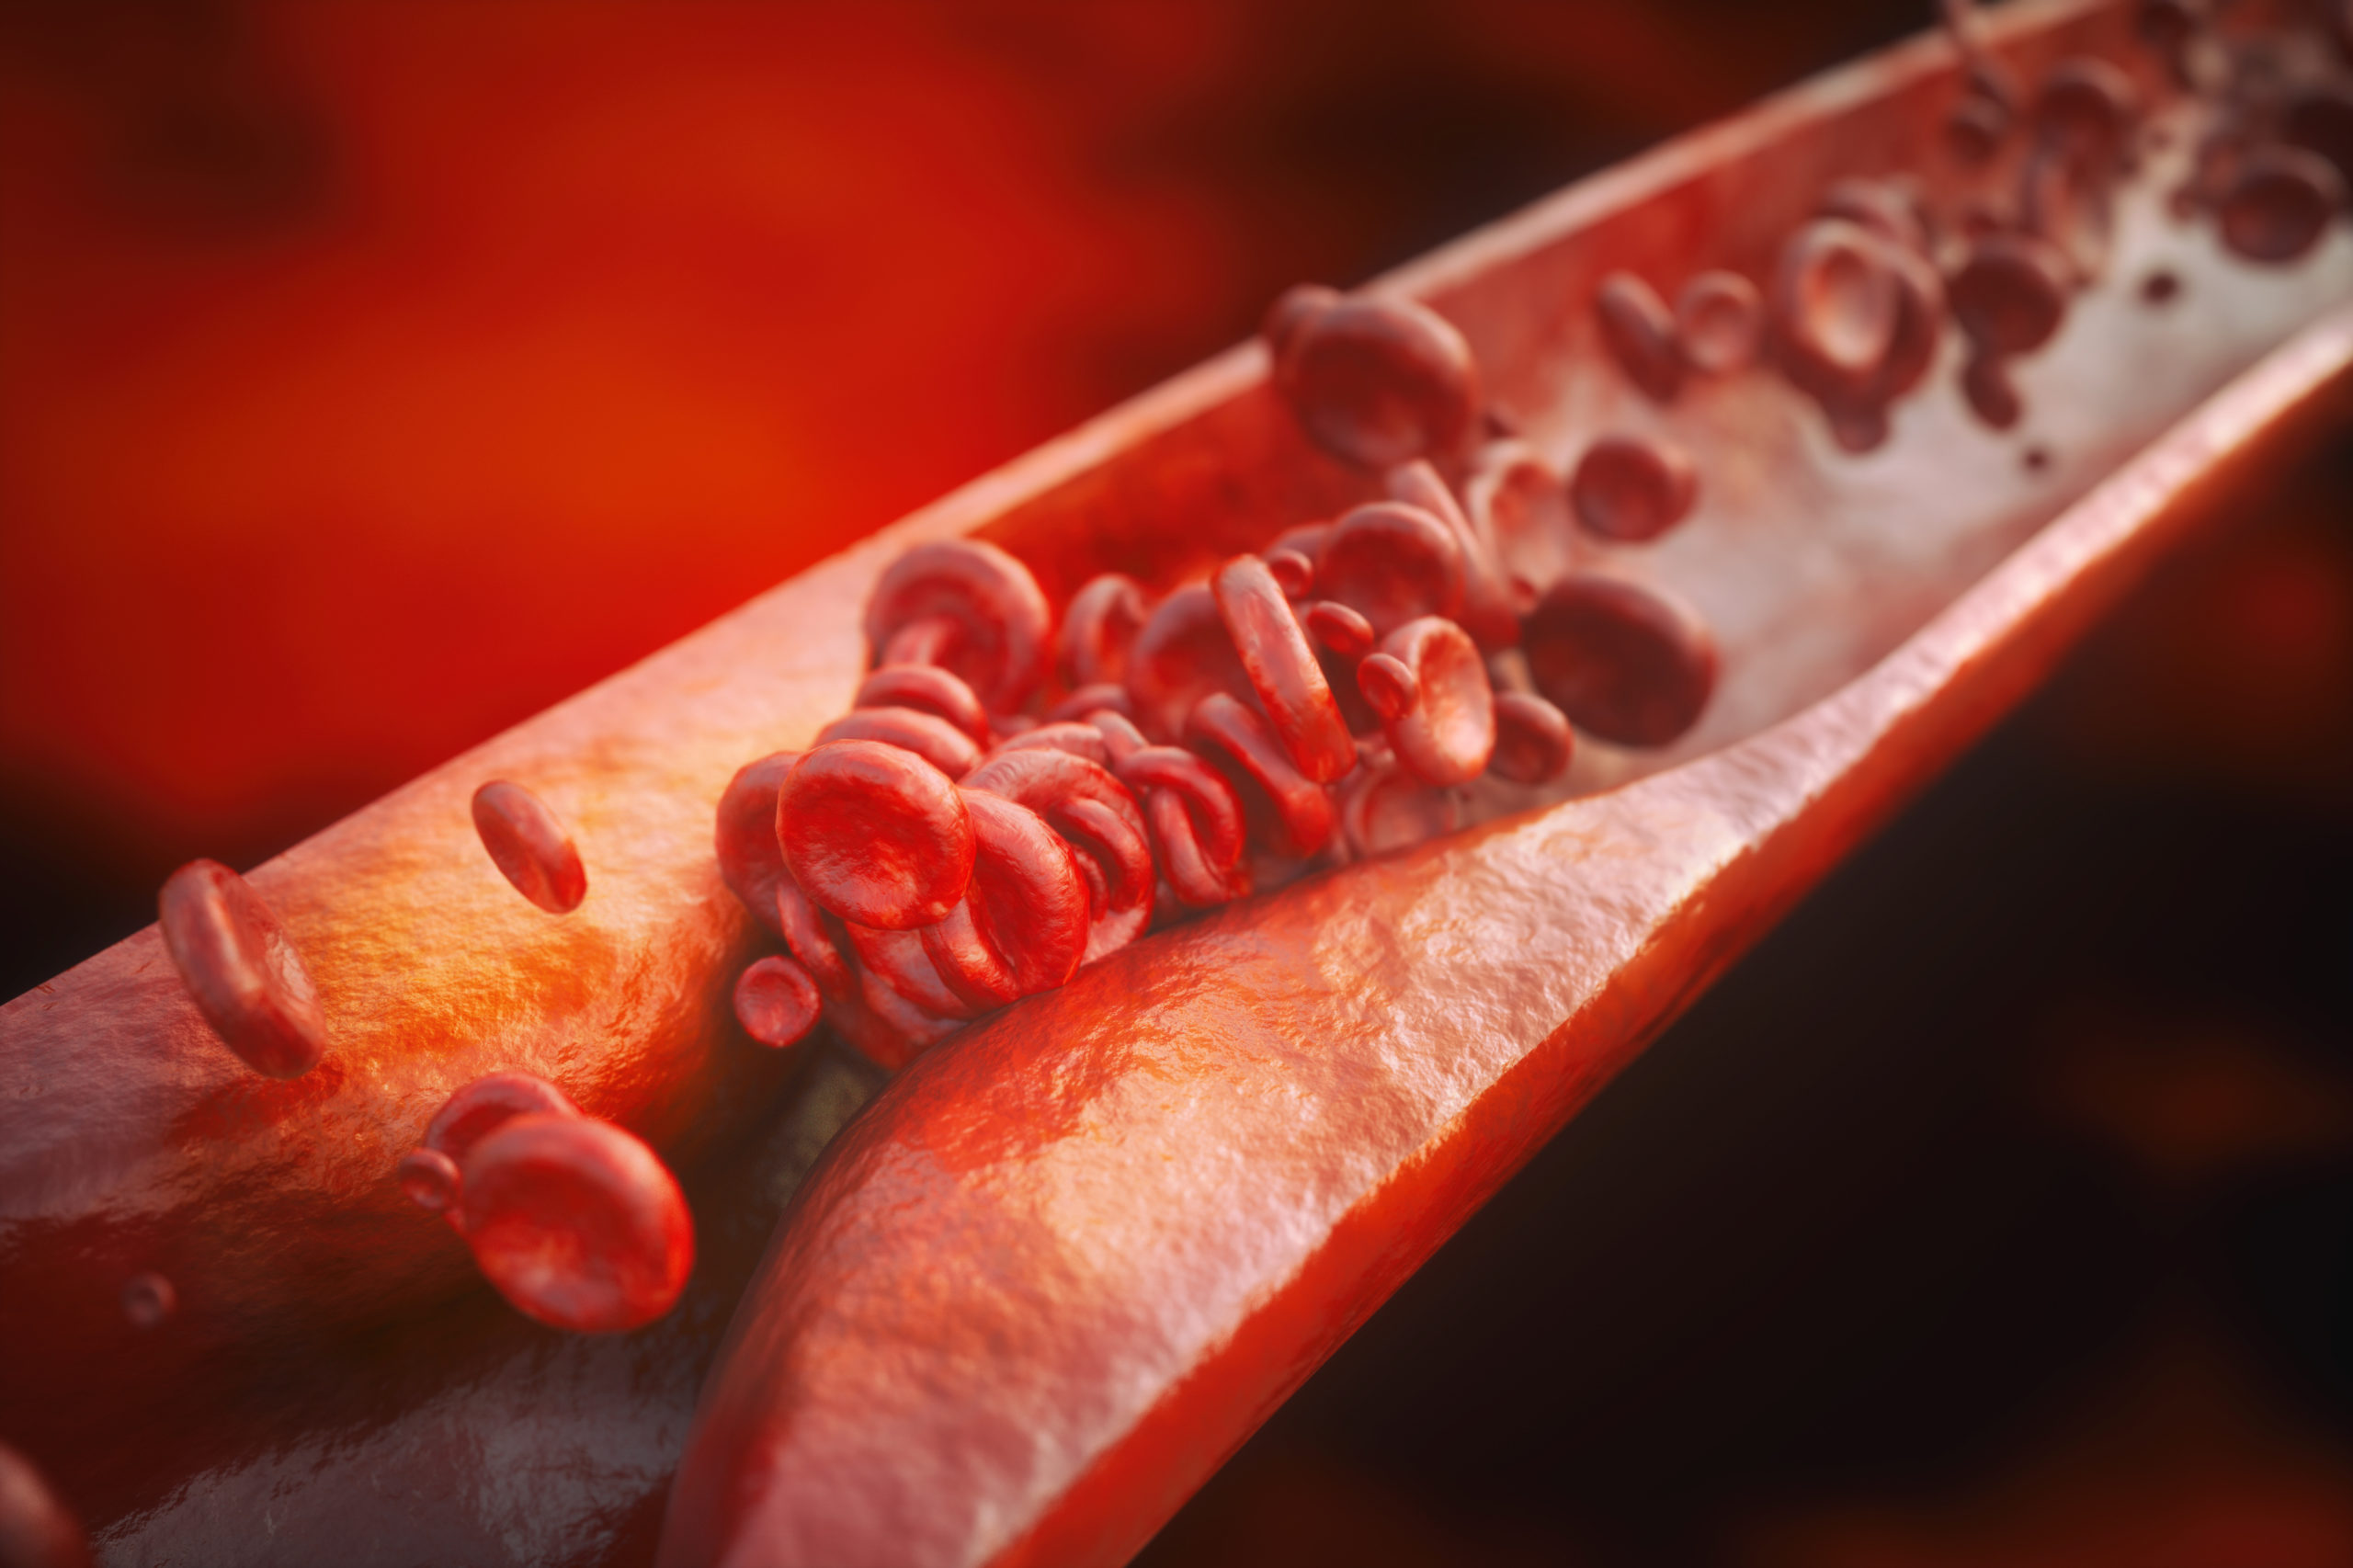 A 3D cross section of a vein and the red blood cells getting caught in a restricted area